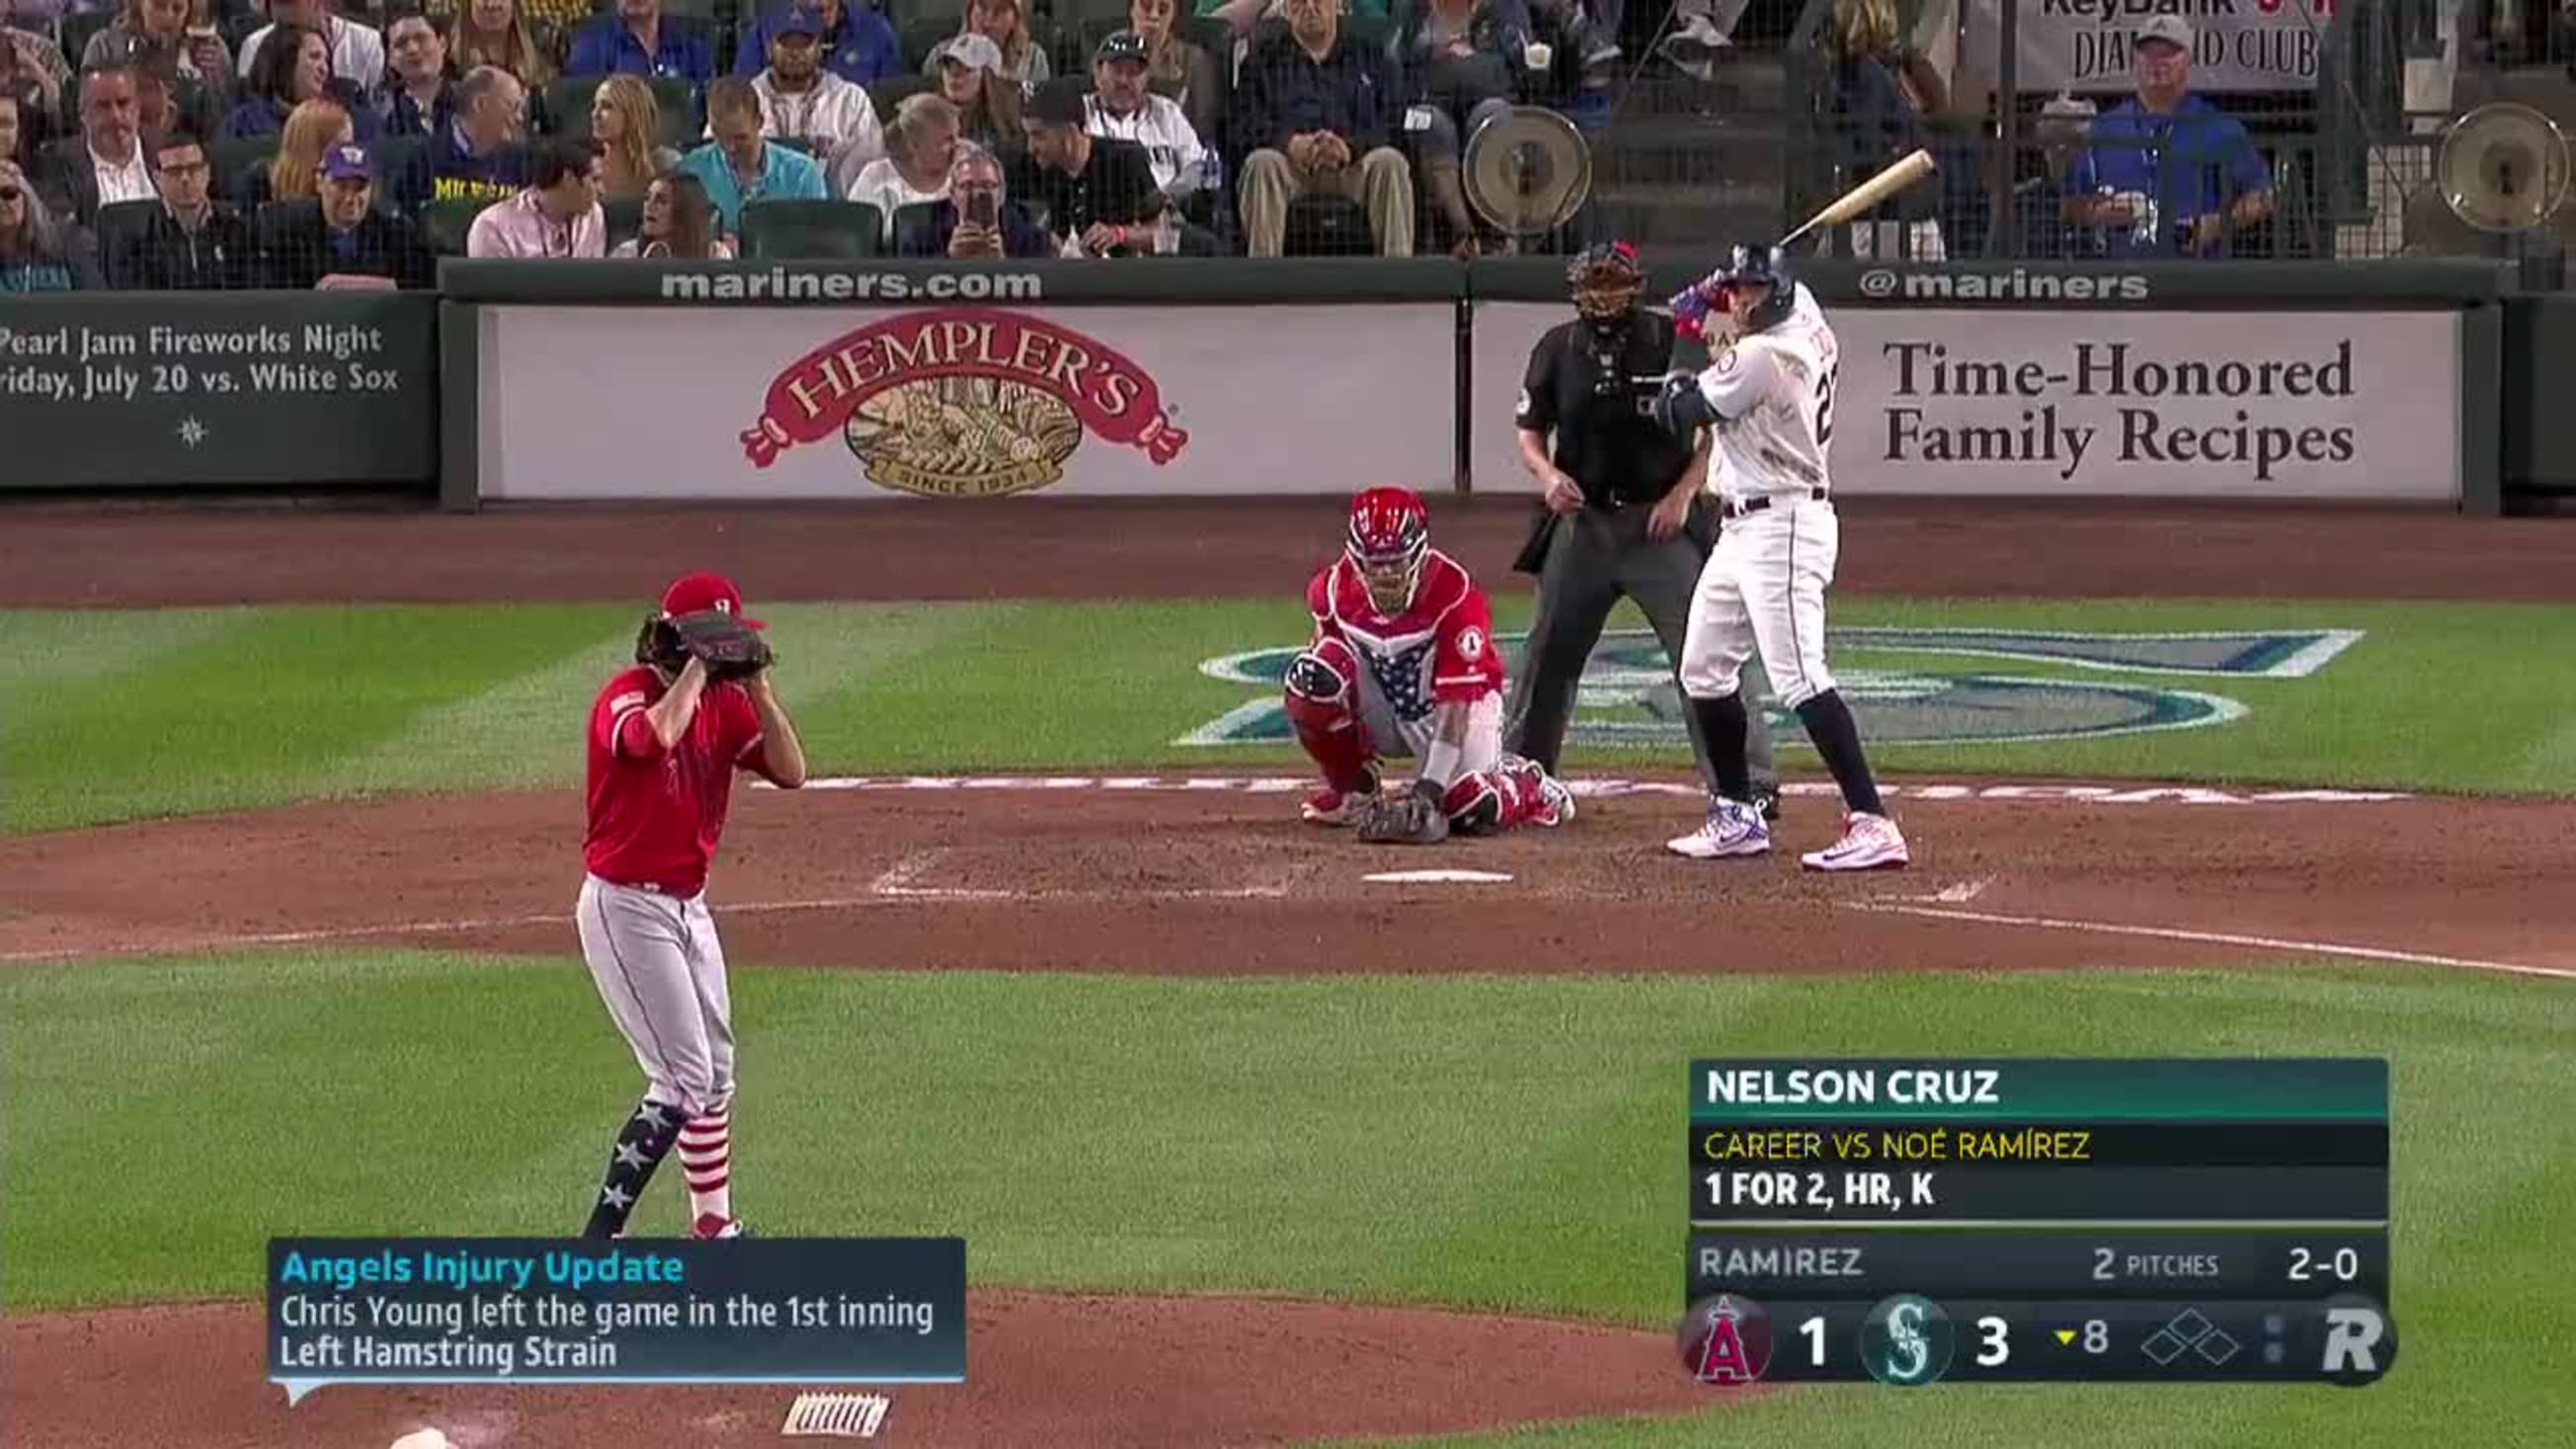 Nelson Cruz homers (22) on a fly ball to left field.